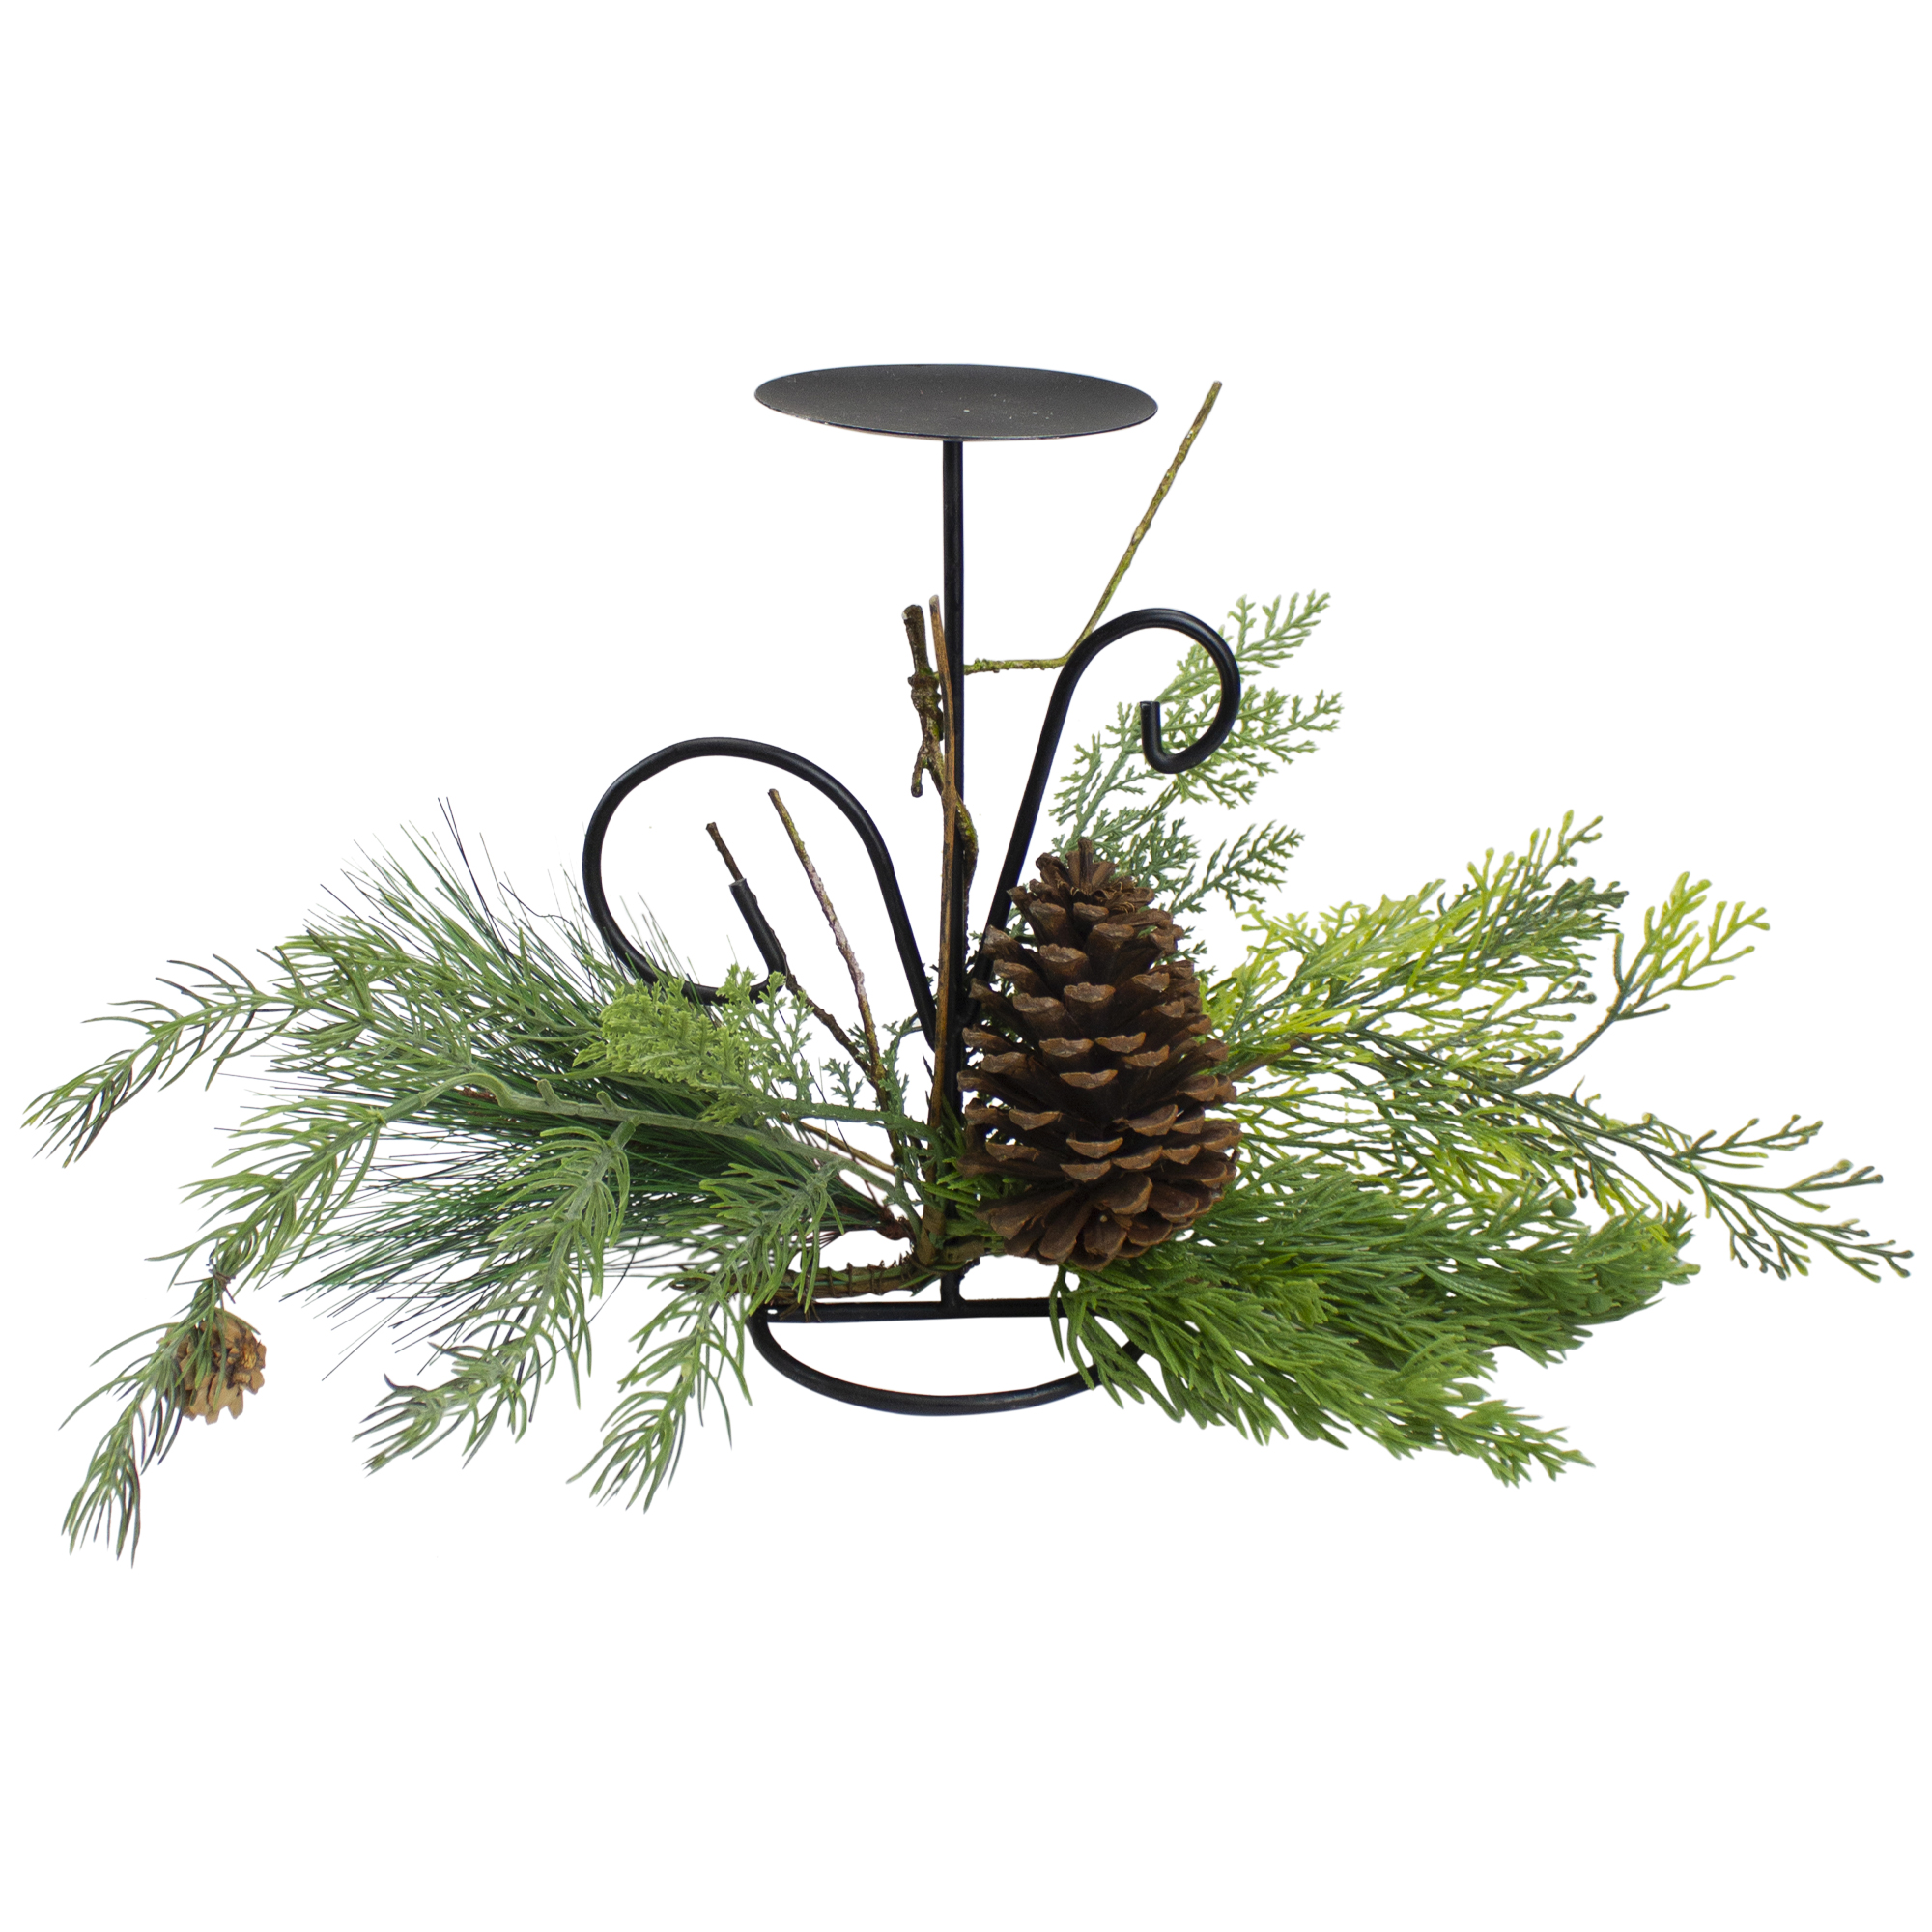 Northlight 10" Green Artificial Sprigs and Pine Cone Christmas Candle Holder, Green - image 1 of 3